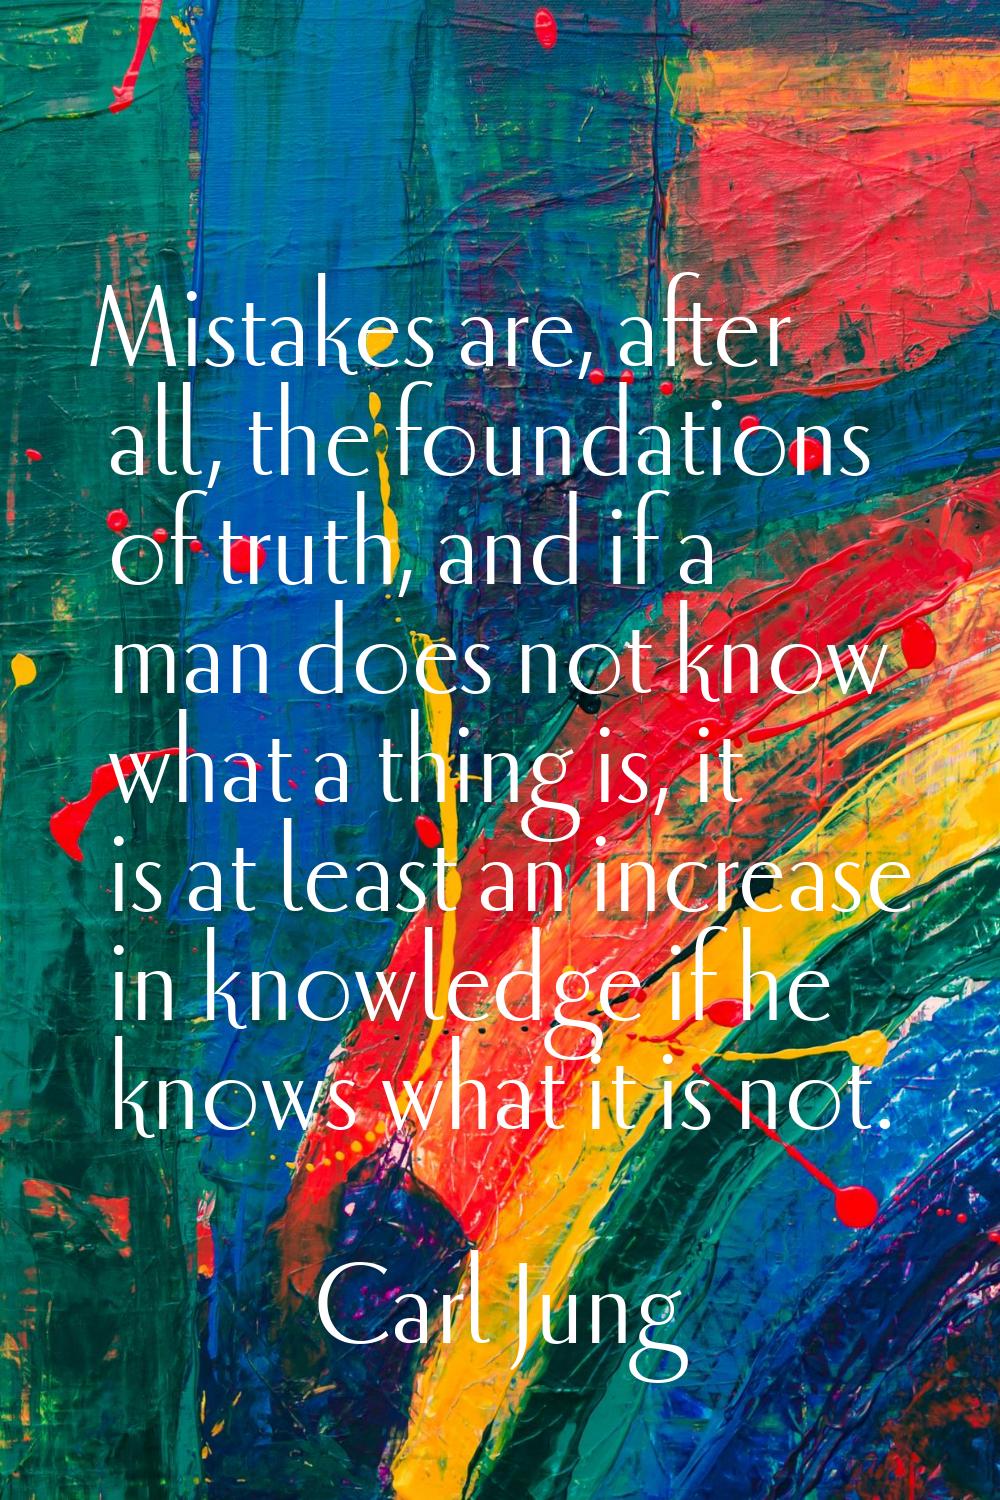 Mistakes are, after all, the foundations of truth, and if a man does not know what a thing is, it i